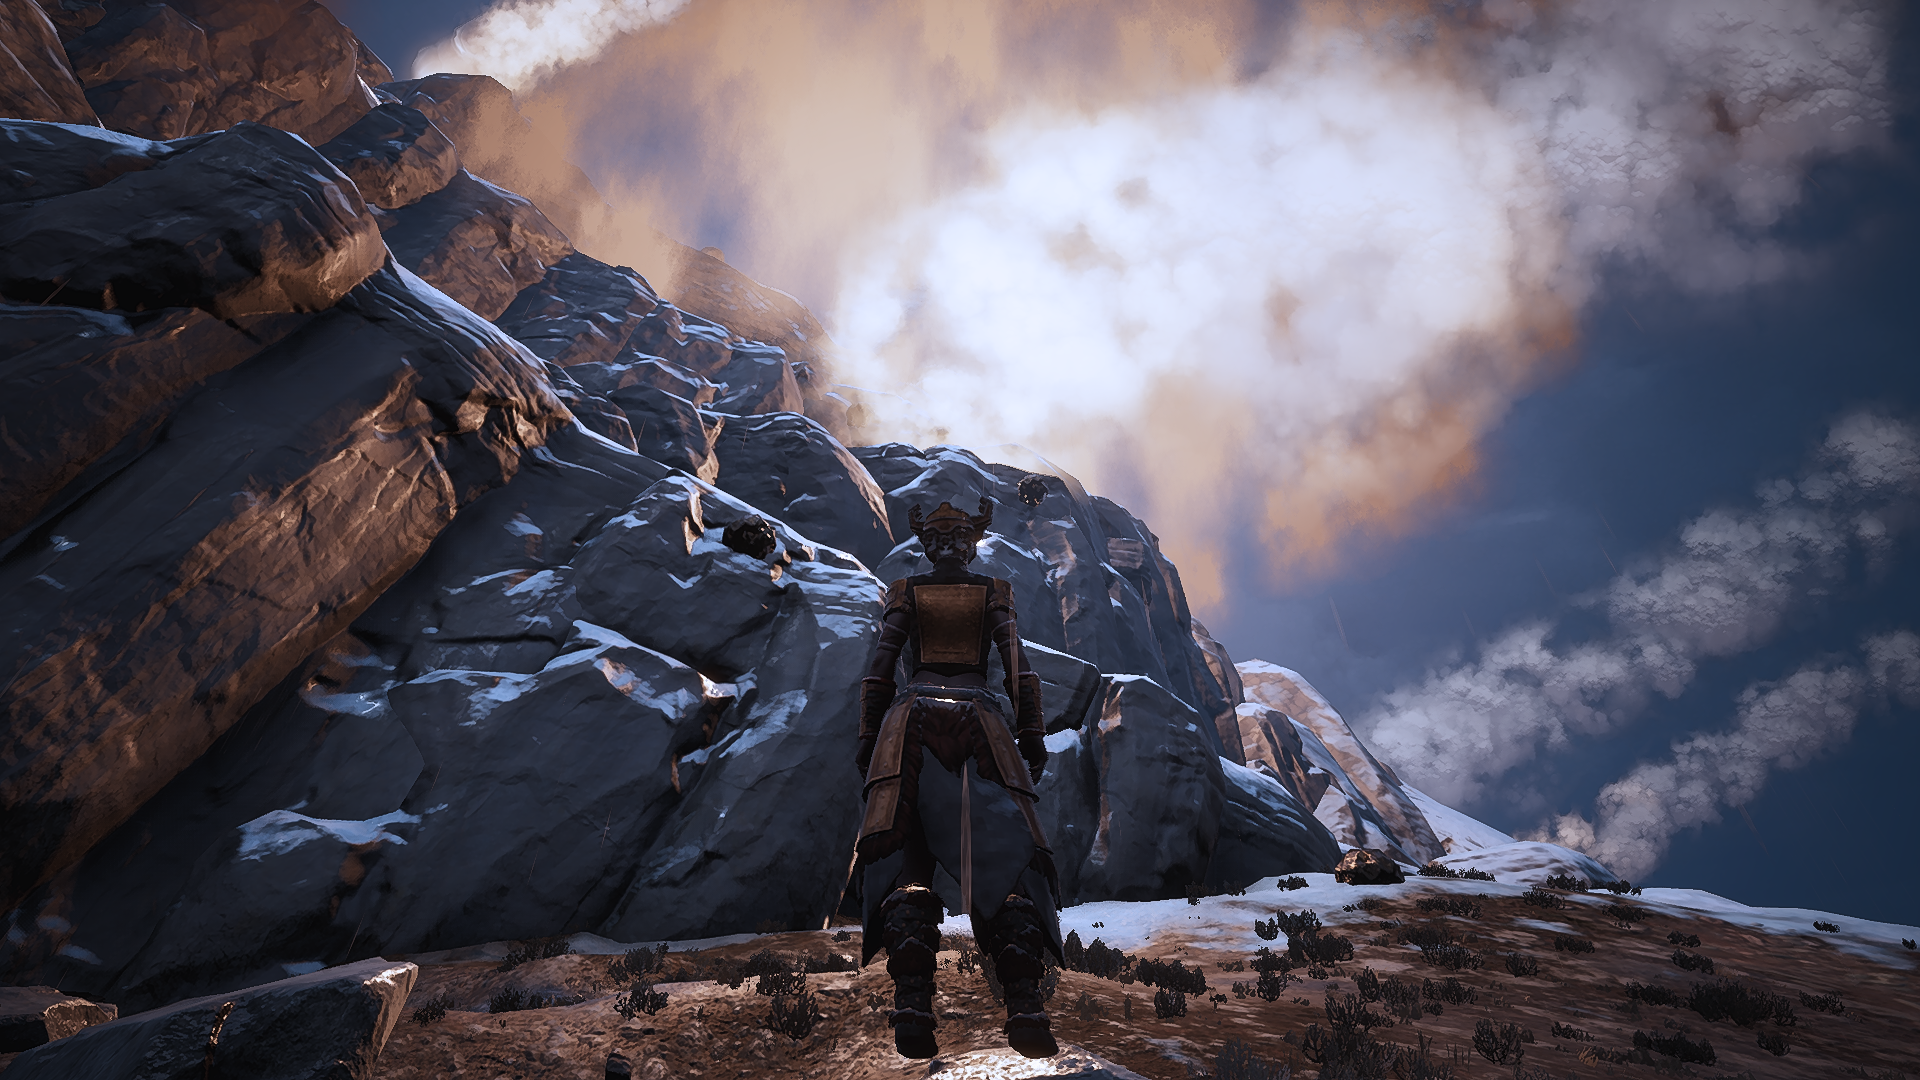 conan exiles where to find star metal 2018